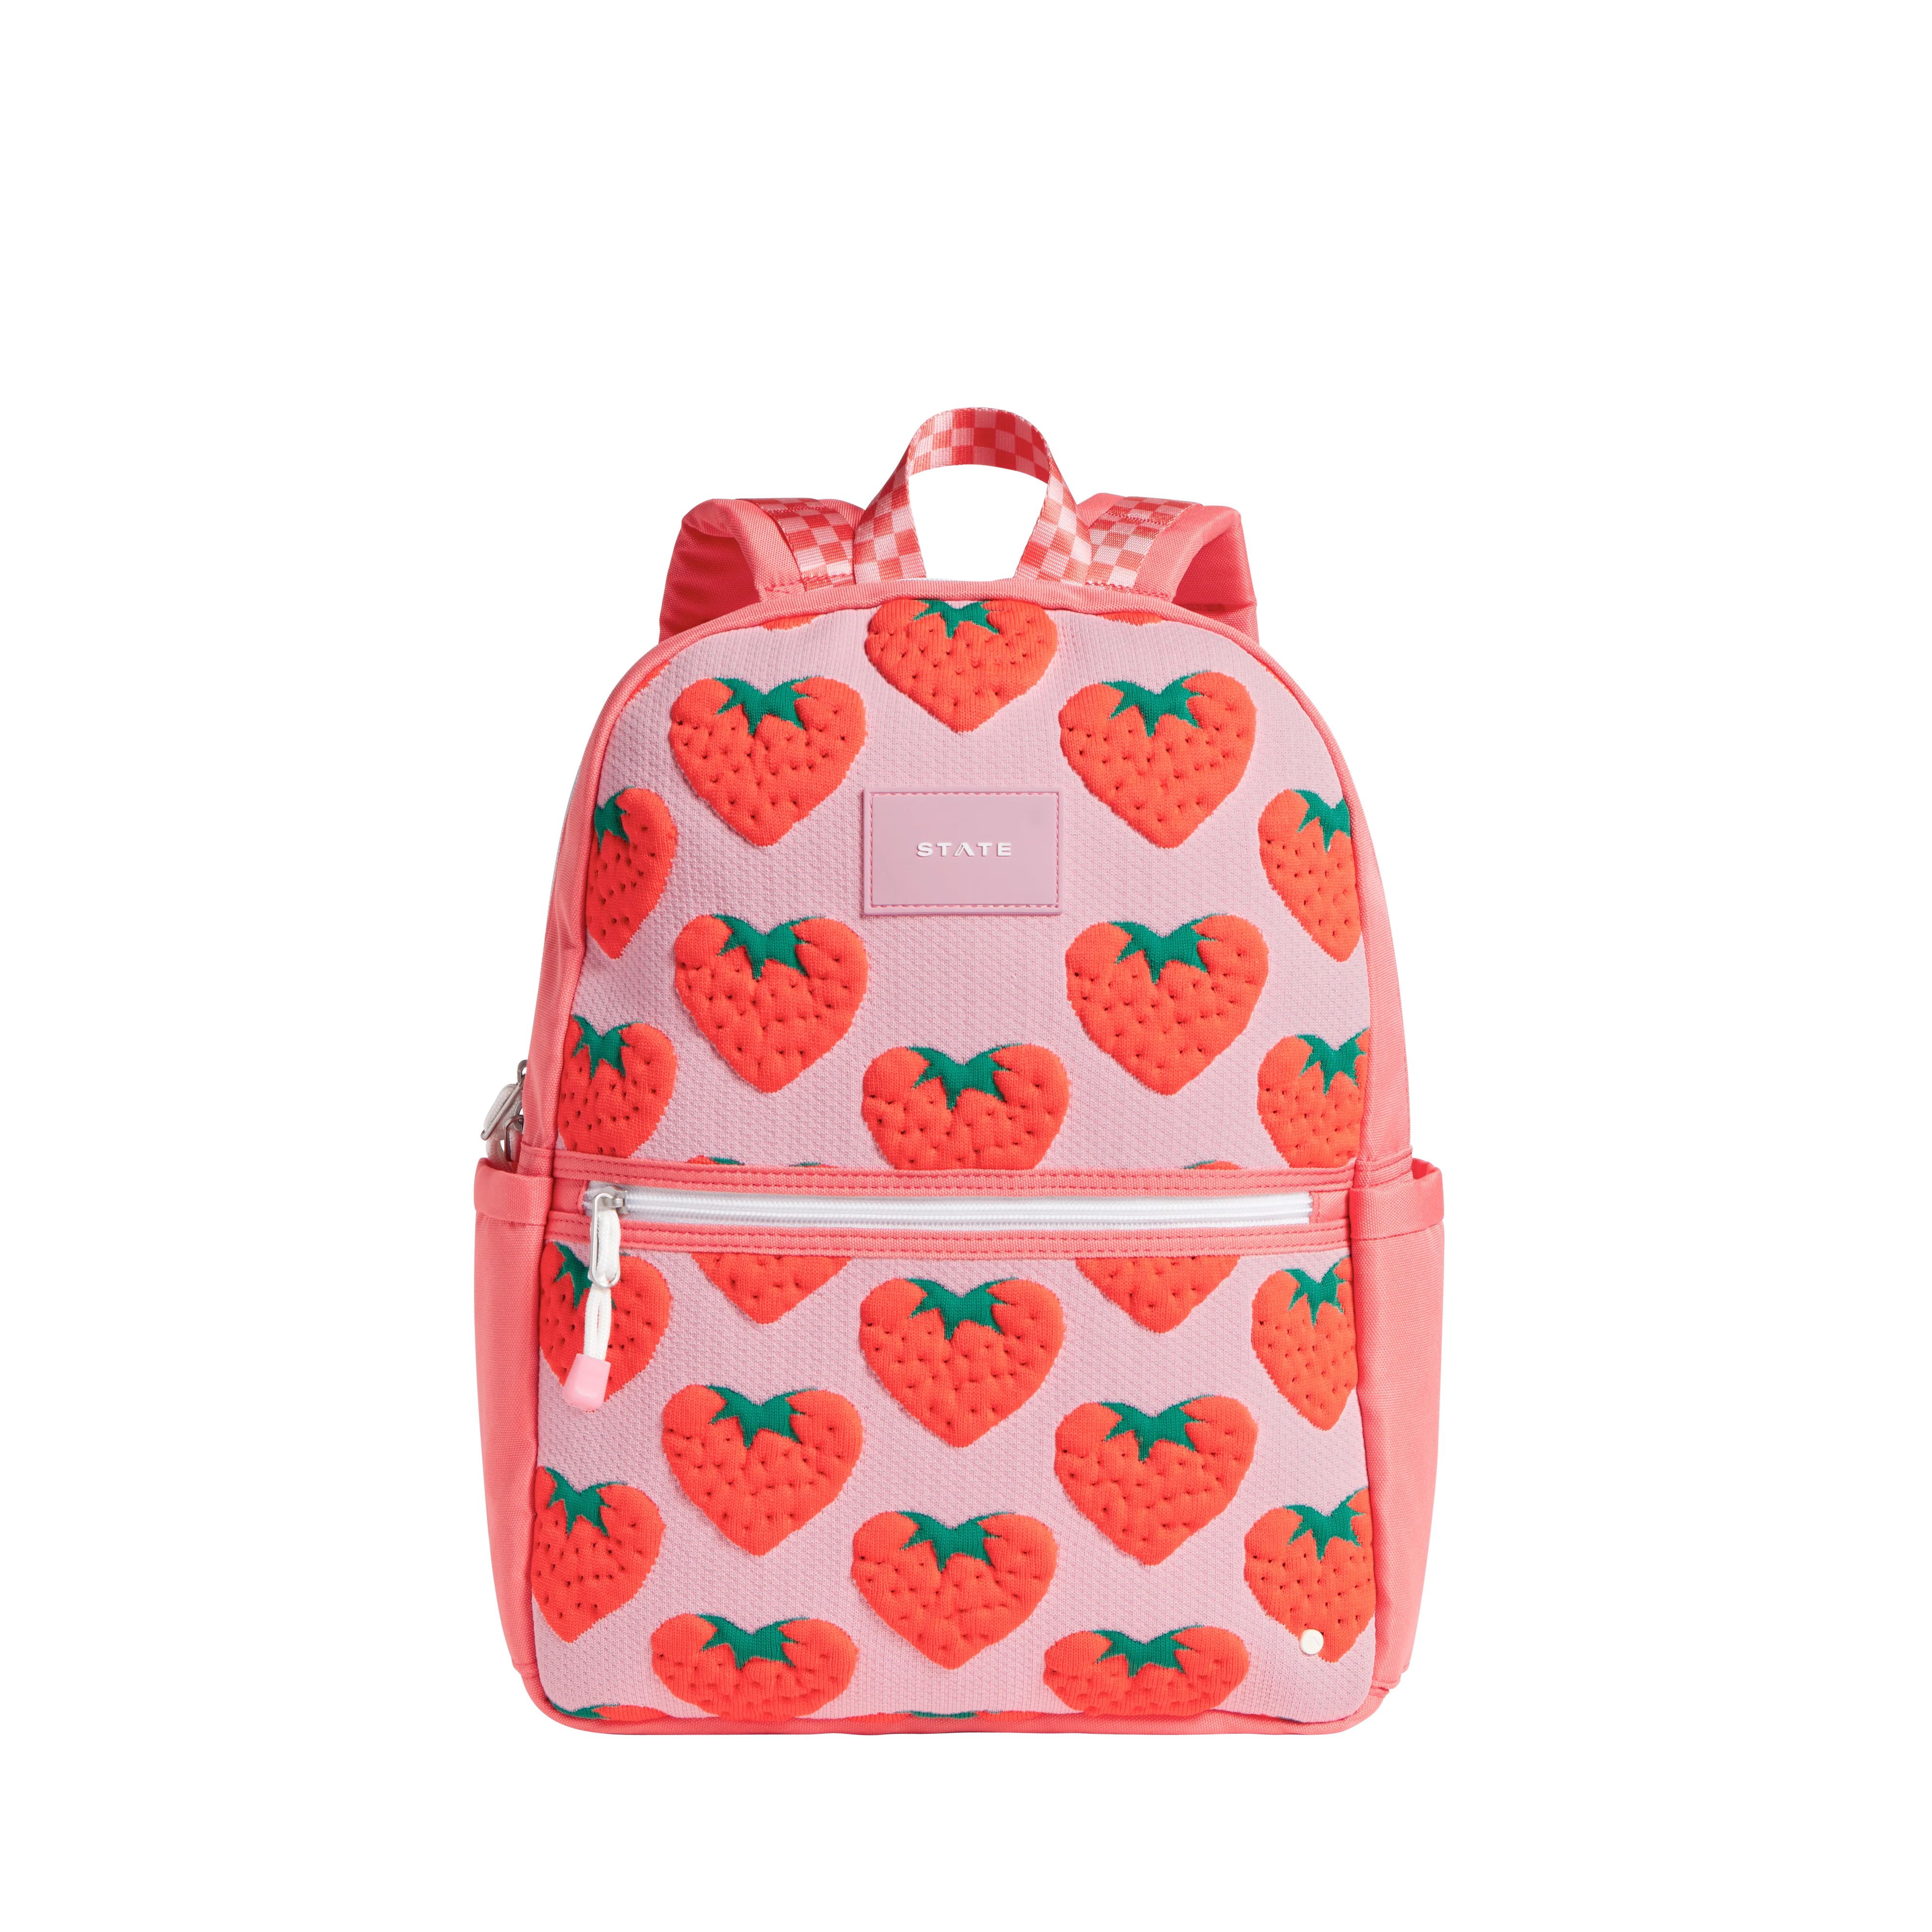 STATE Bags | Kane Kids Travel Backpack Intarsia Strawberries | STATE Bags